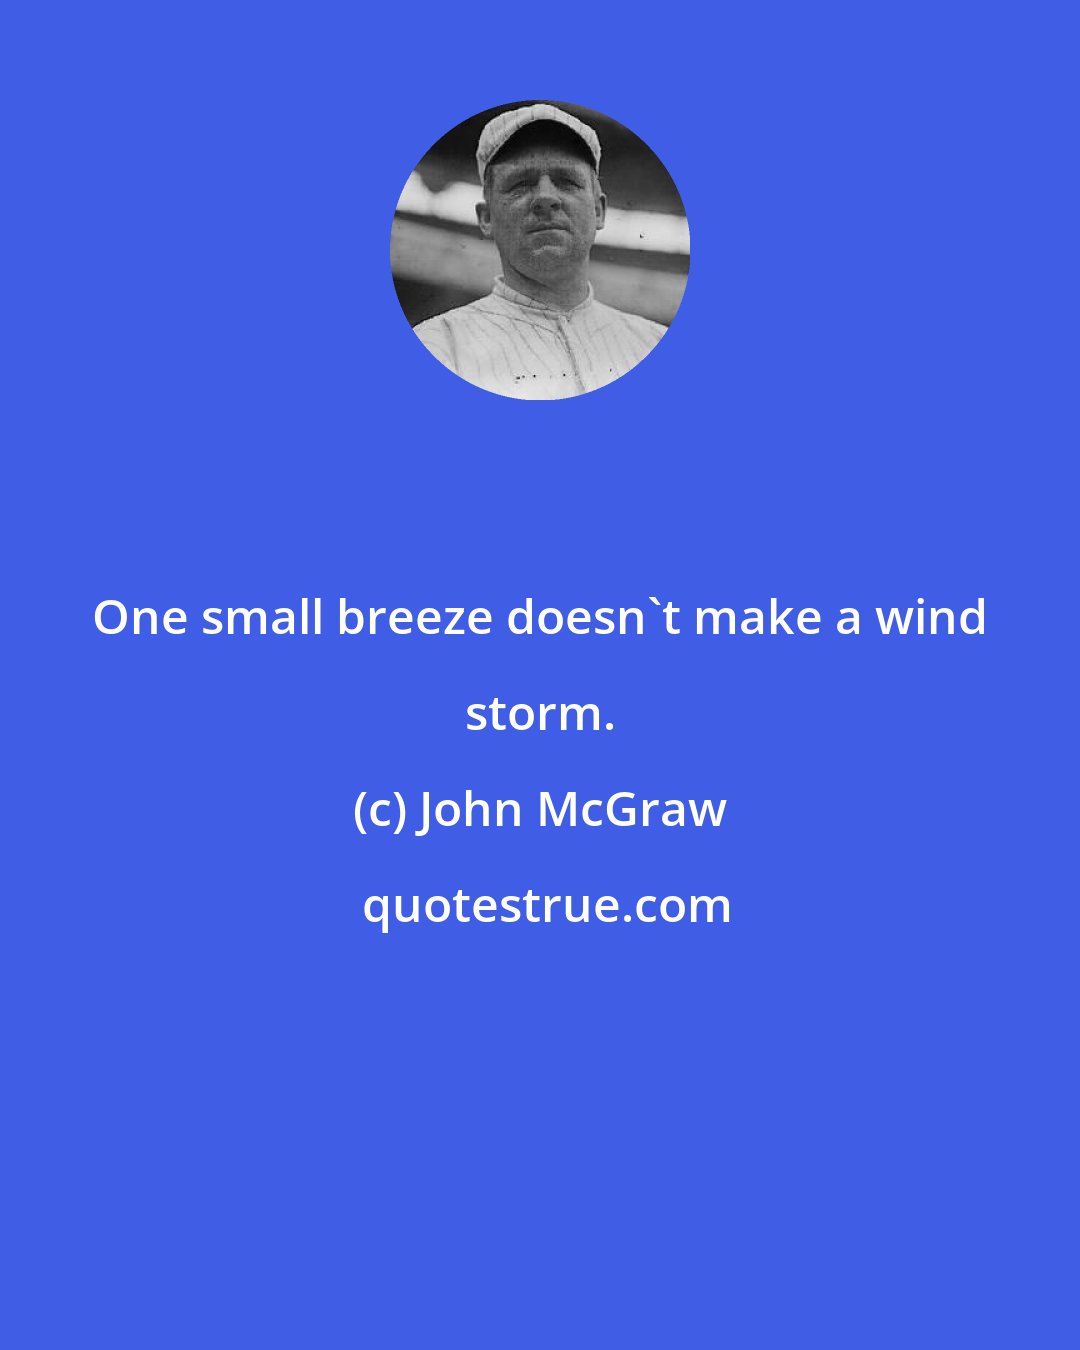 John McGraw: One small breeze doesn't make a wind storm.